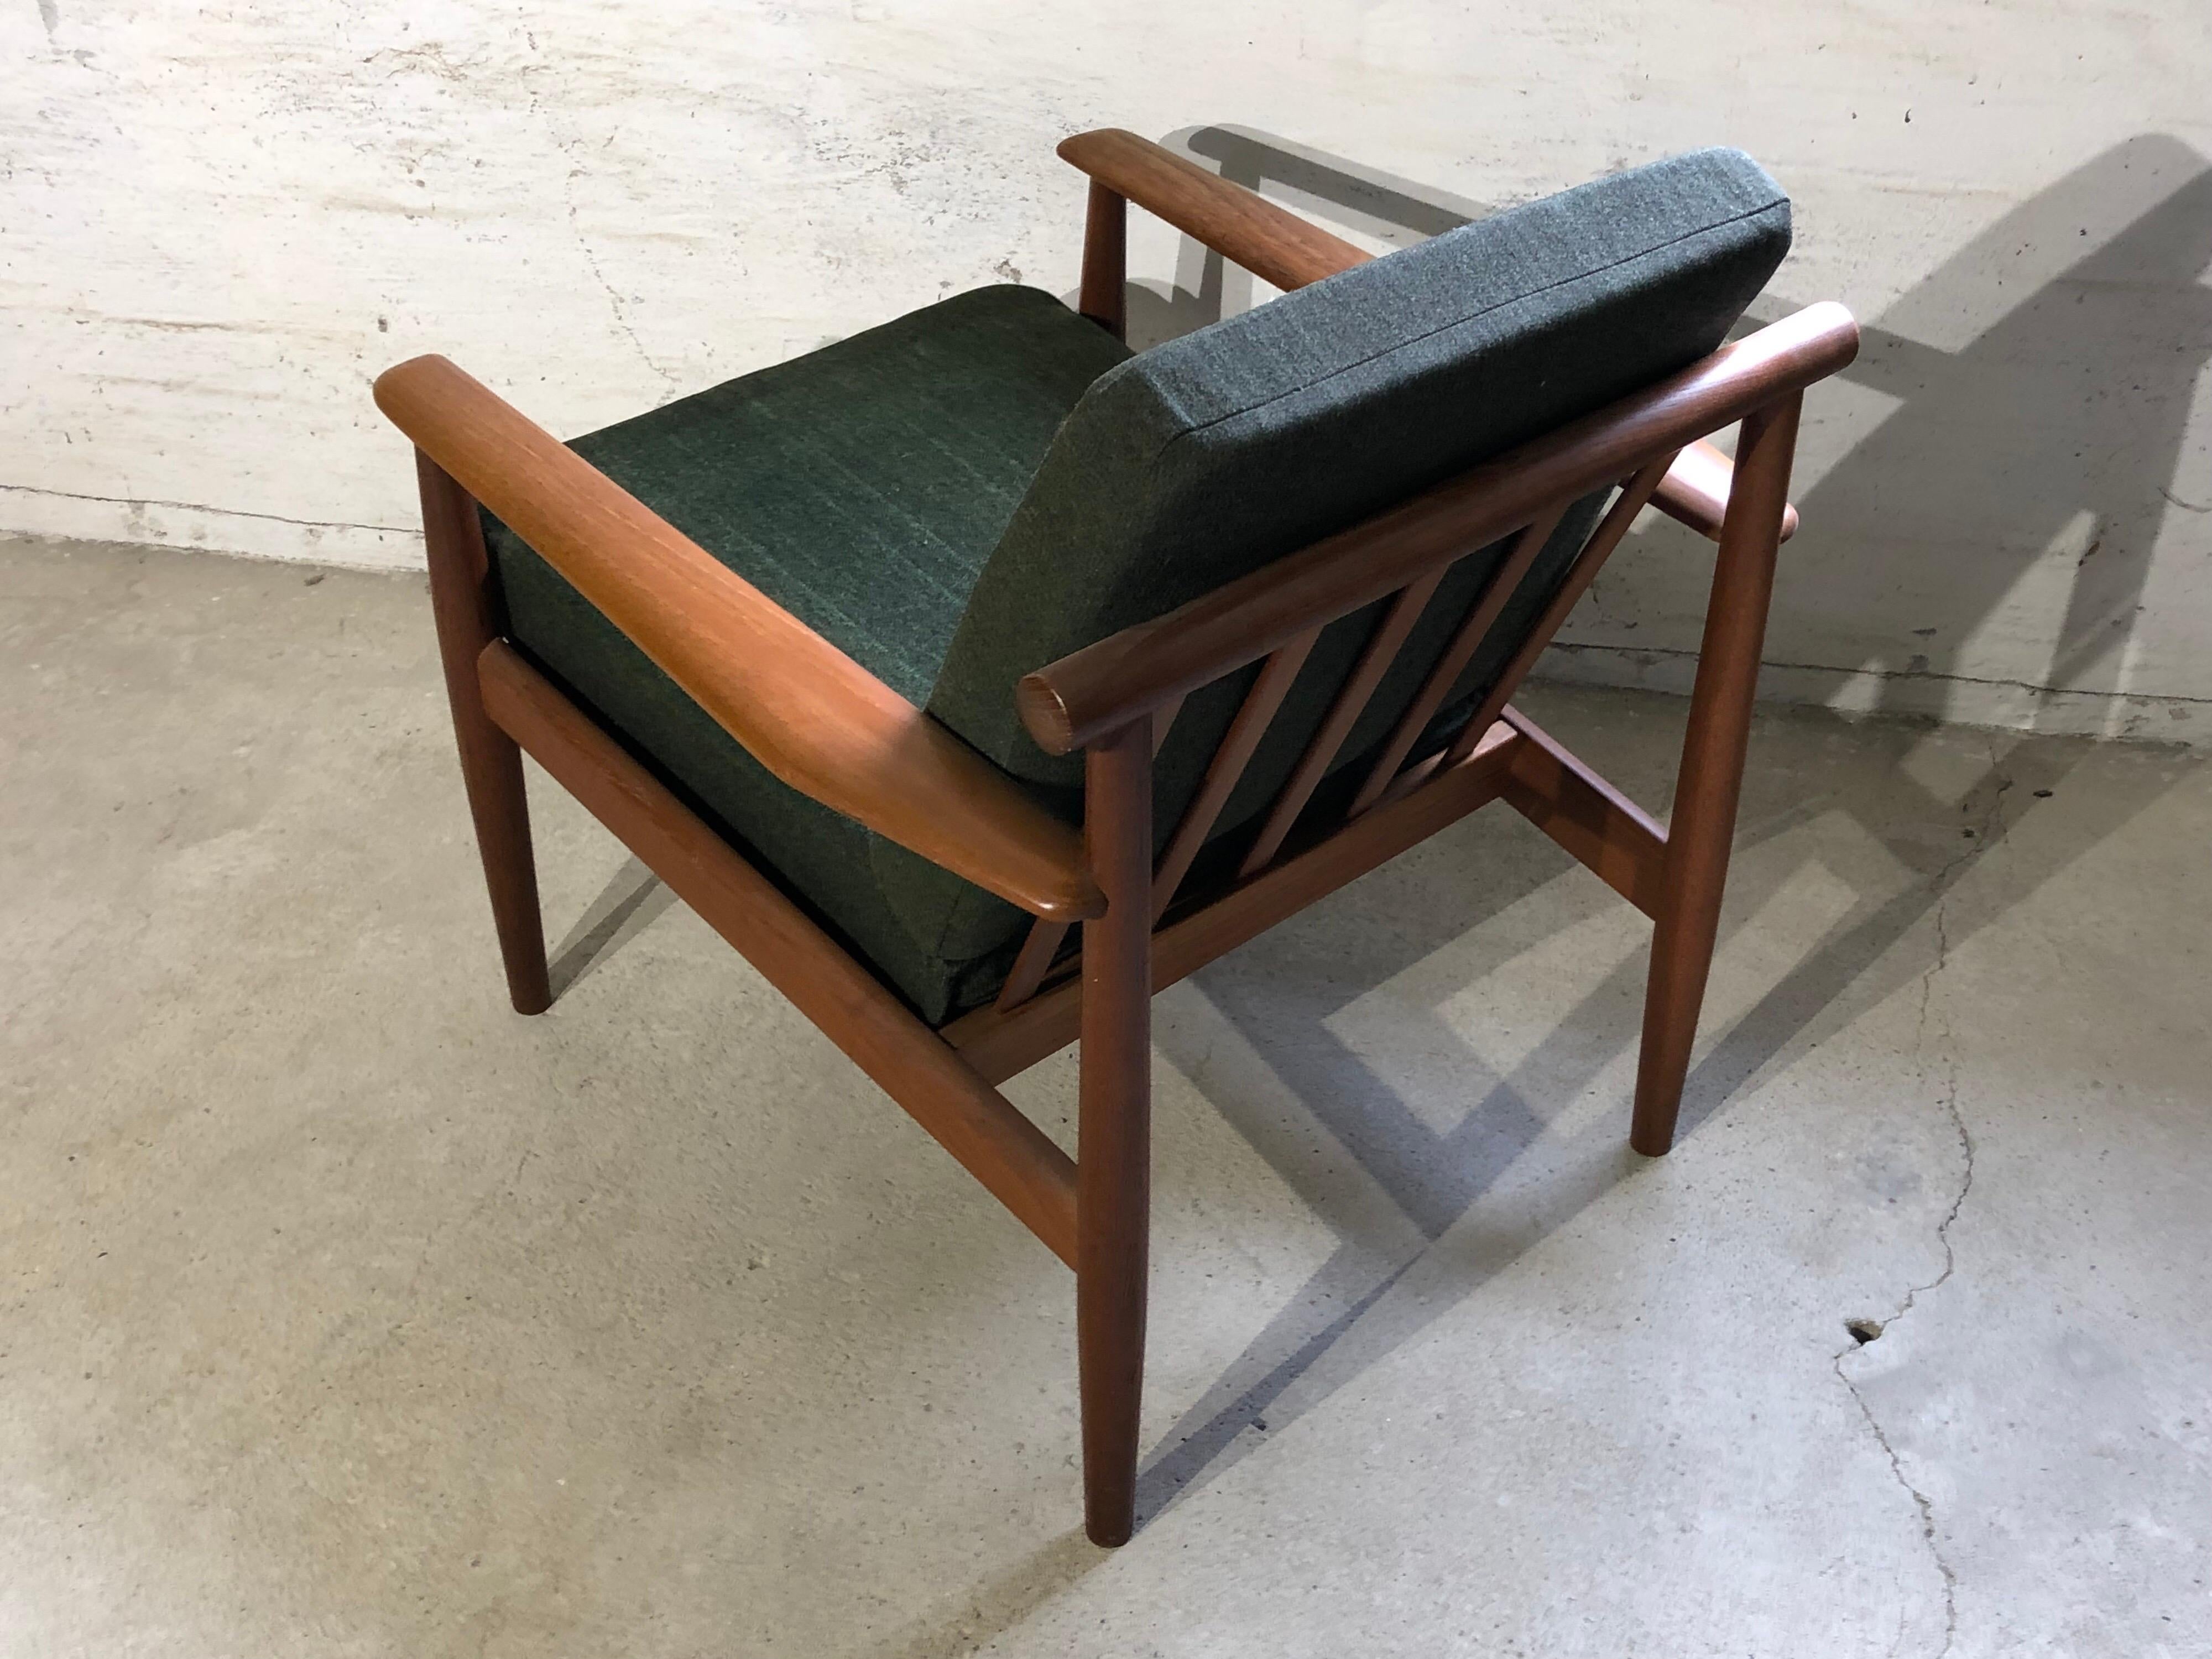 Rare Teak Lounge Chair by Grete Jalk, 1950s Danish Mid-Century Modern In Good Condition For Sale In Odense, DK